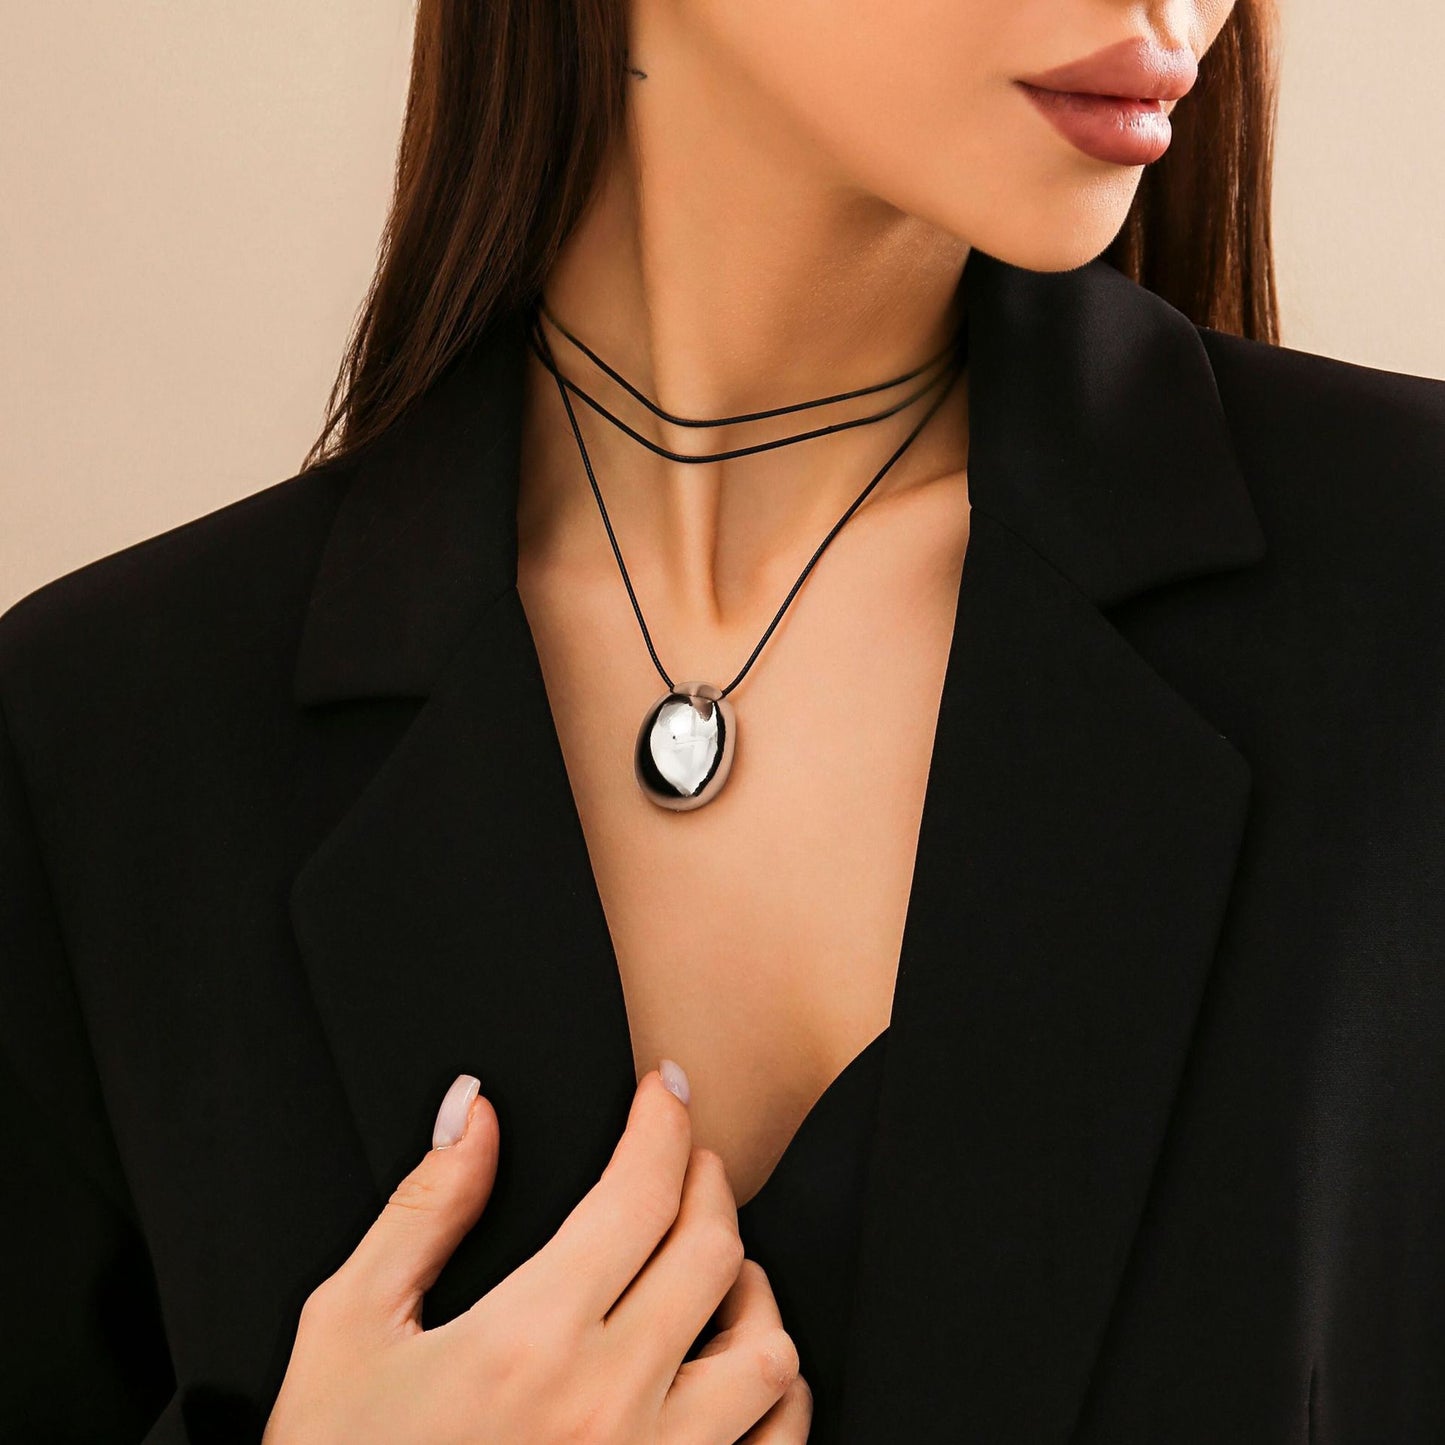 Multi-layered Oval Pendant Choker Necklace in Glossy Finish